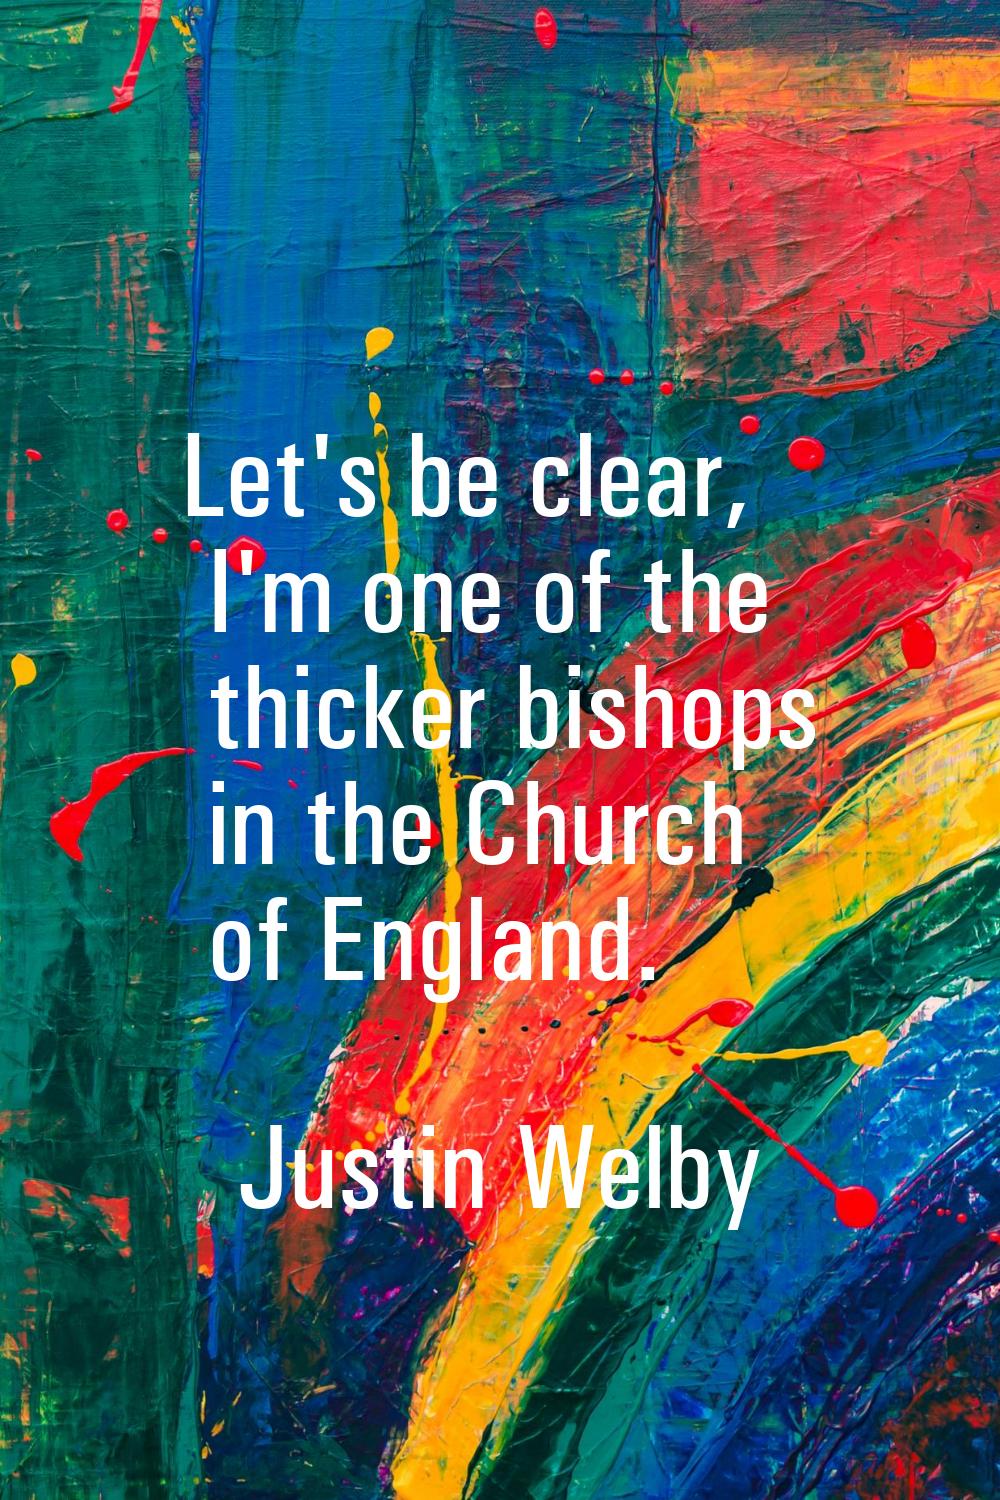 Let's be clear, I'm one of the thicker bishops in the Church of England.